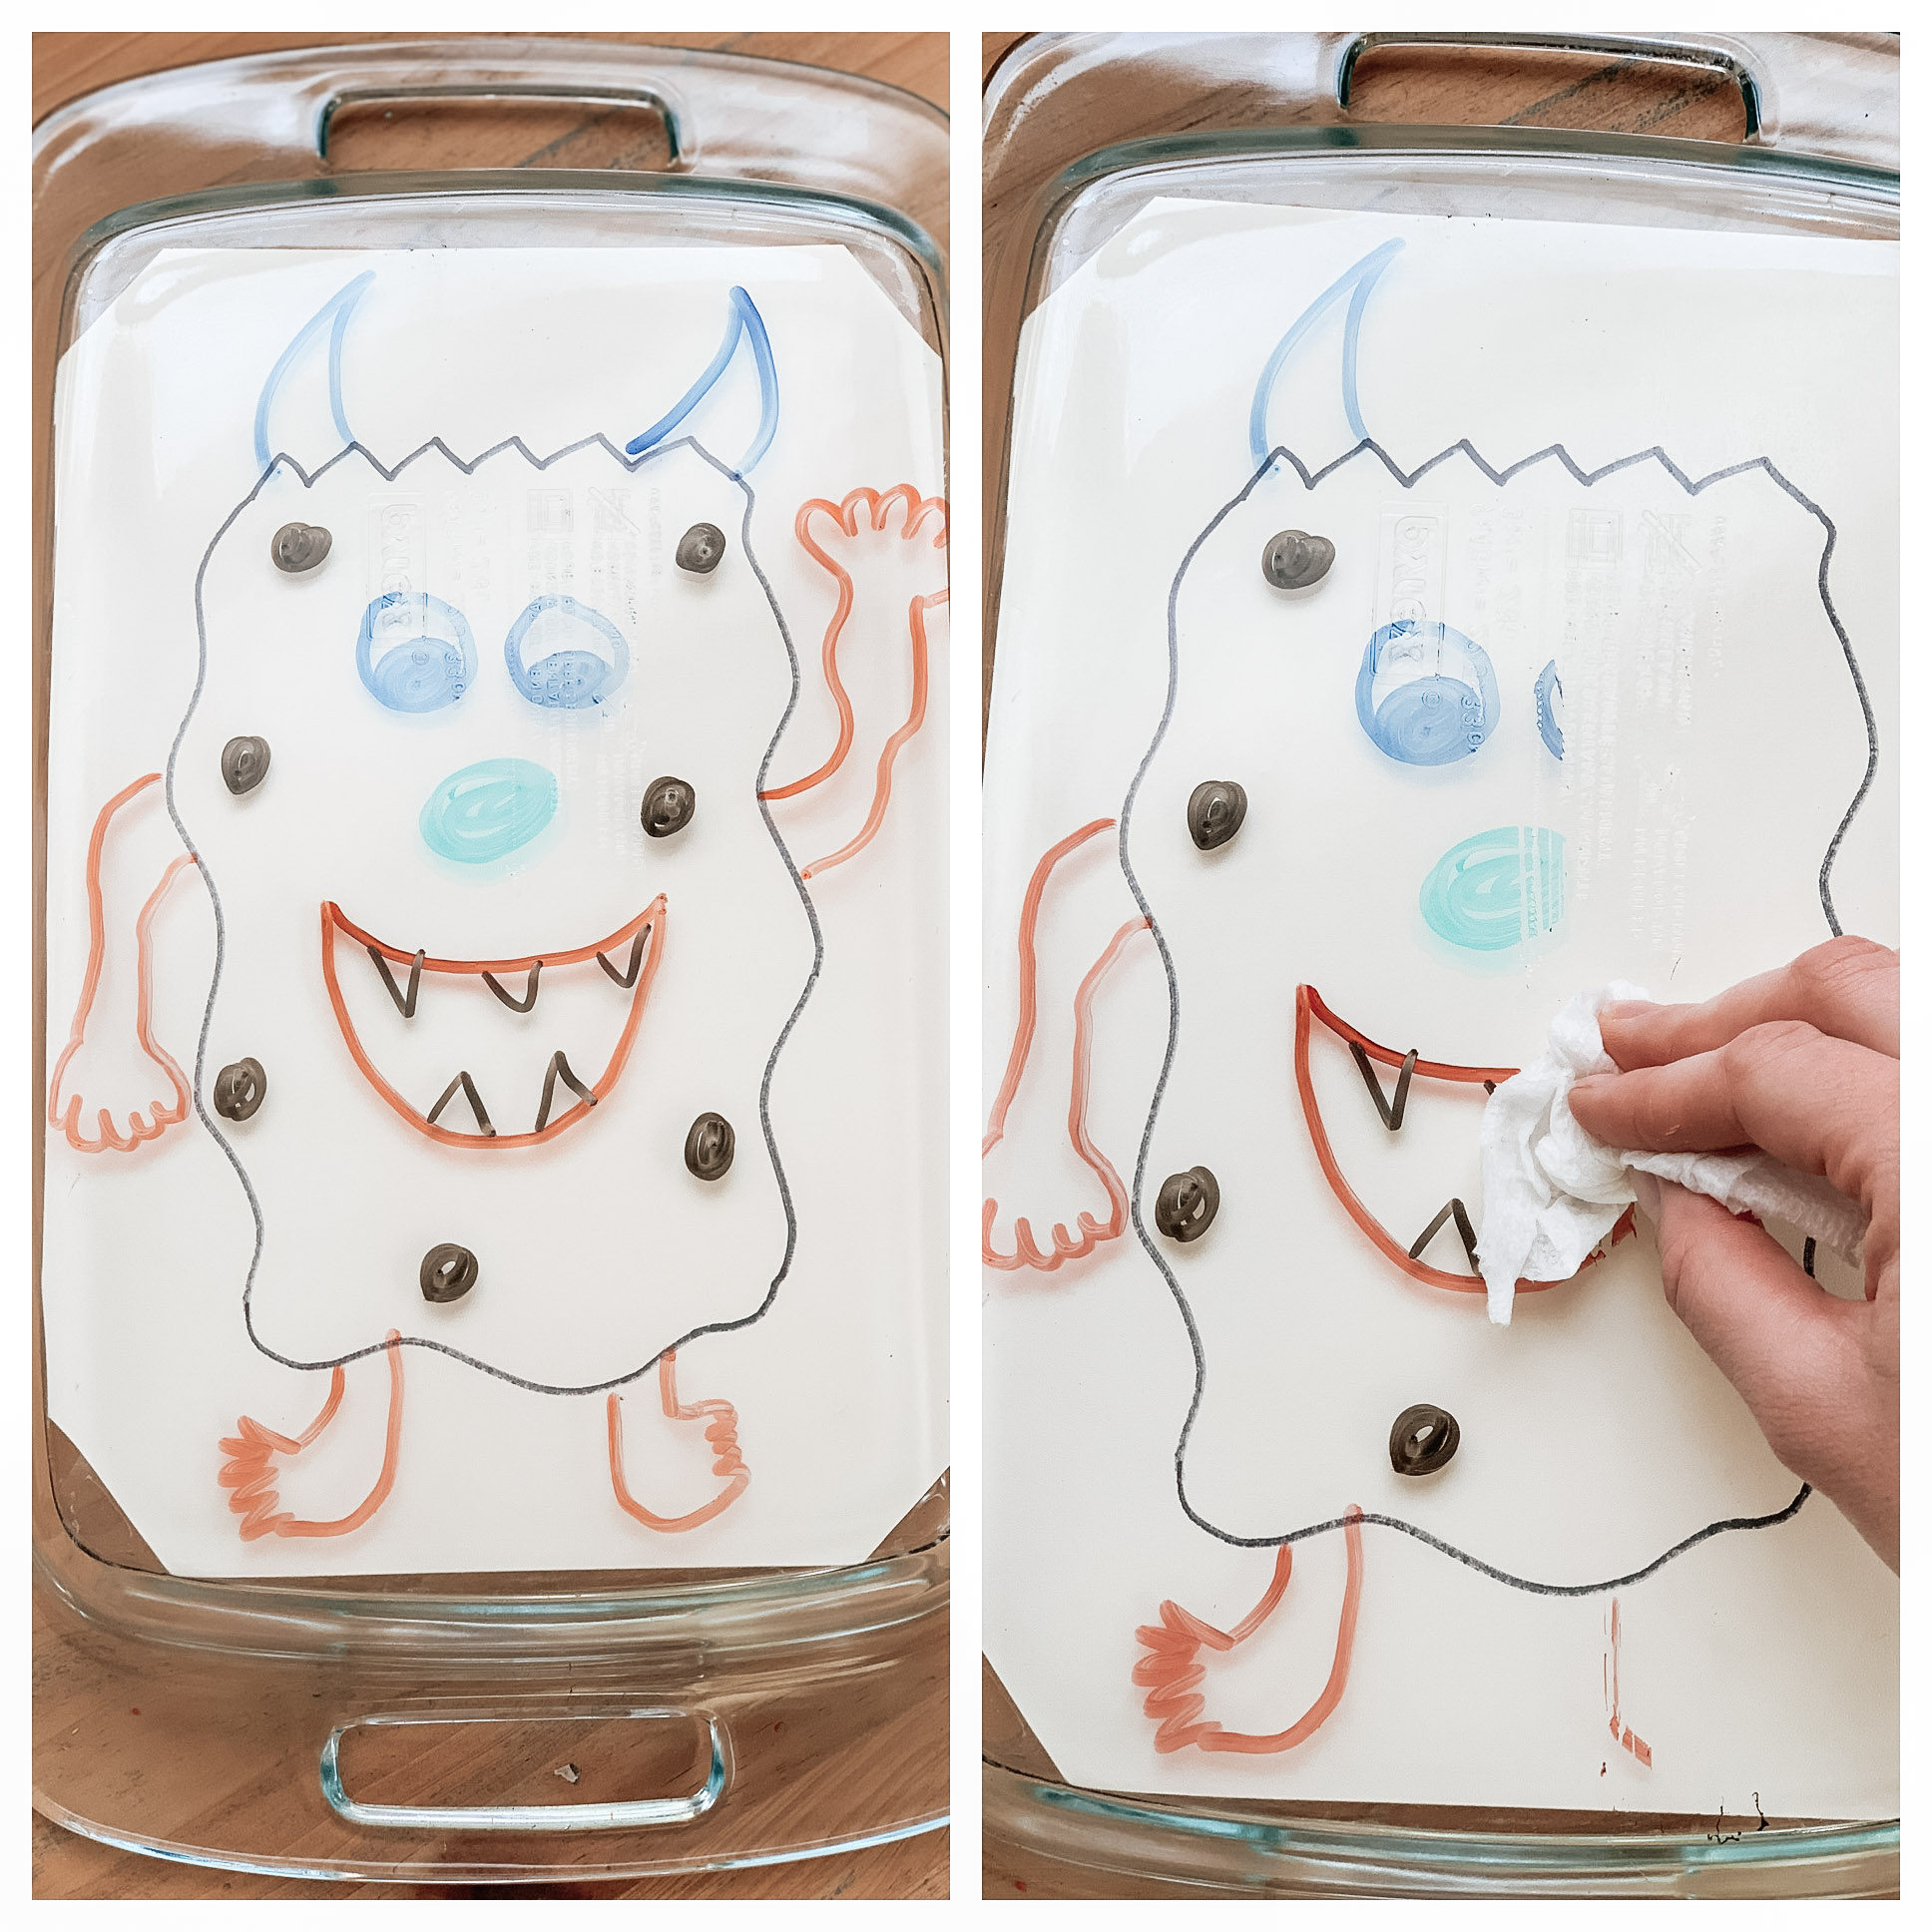 Completed monster craft showing how to draw faces on the dish and wipe the face off the monster.